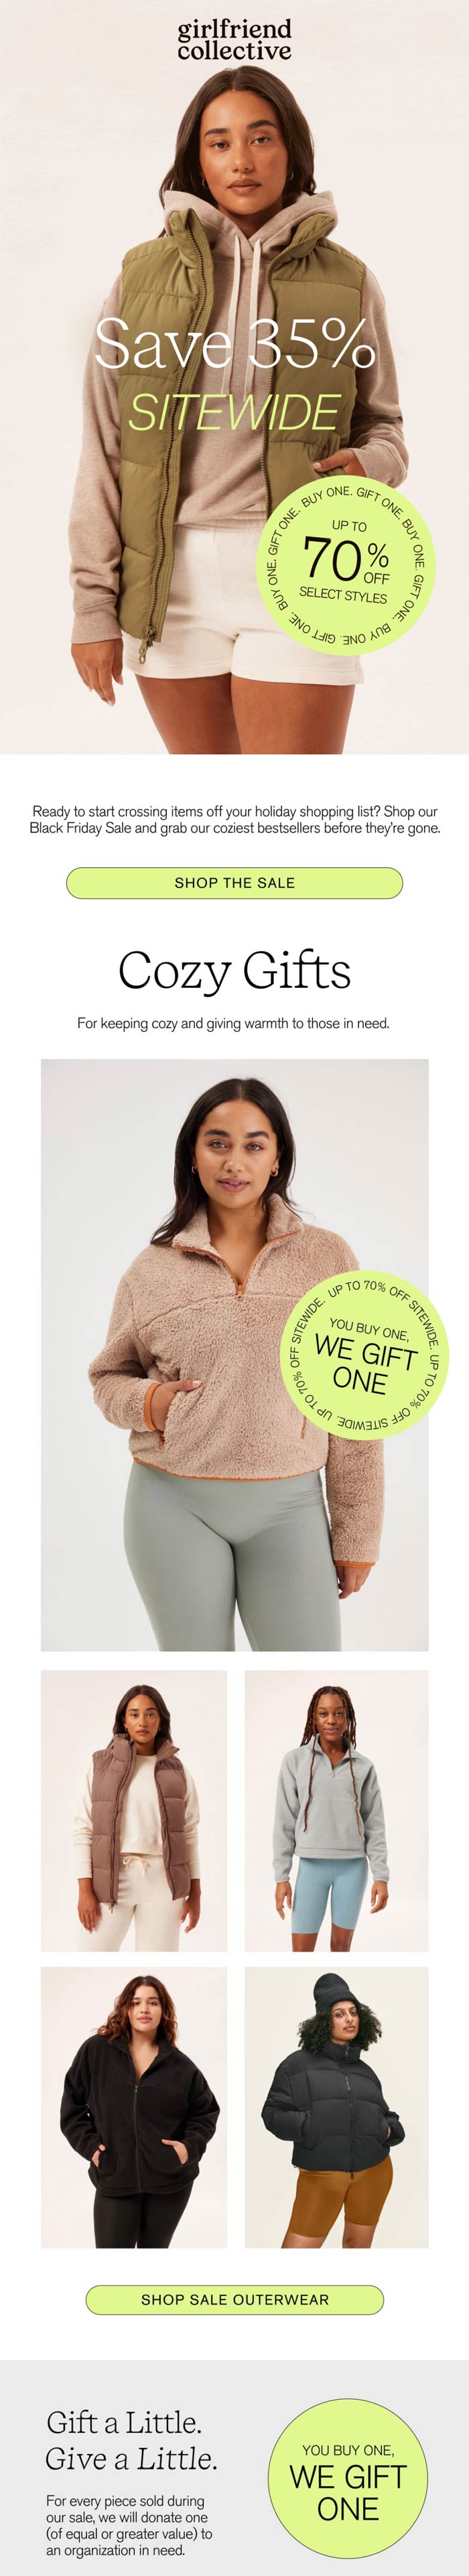 Girlfriend Collective stores Coupon  35% off everything at Girlfriend Collective #girlfriendcollective 